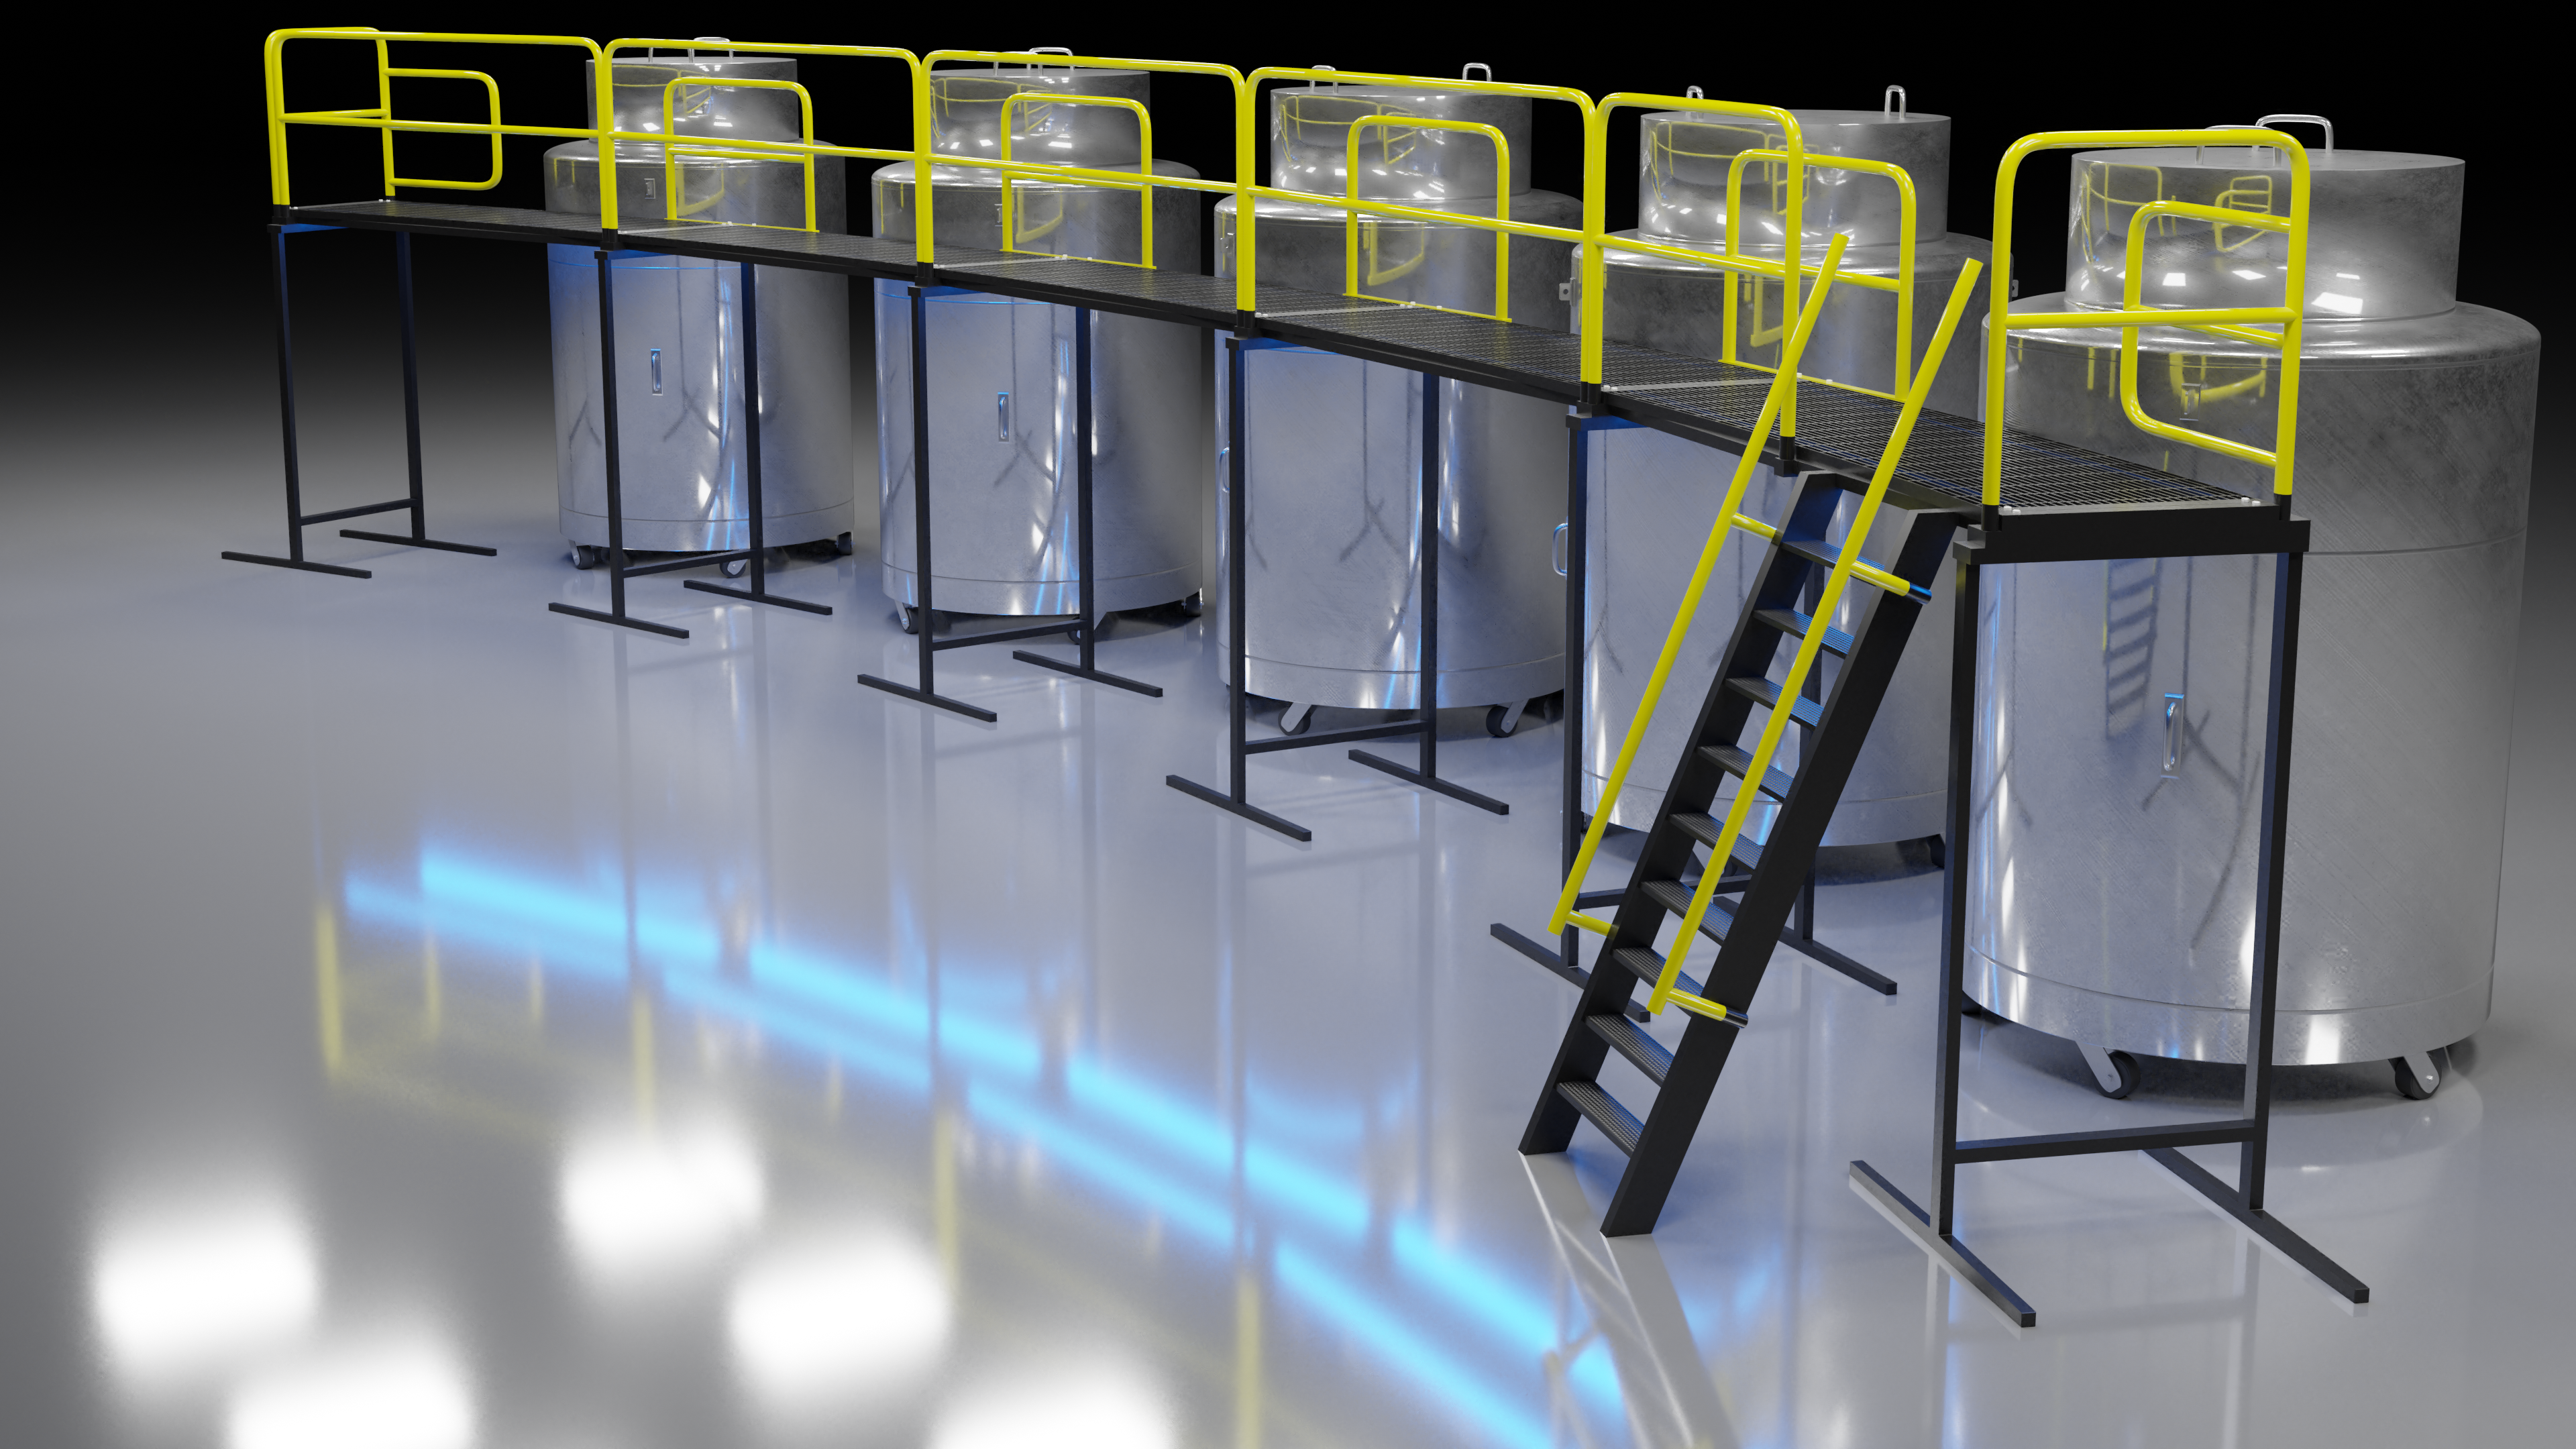 Cryonics Cryonics Institute 3D Graphics Blender Warehouse Facility Ladder Scaffolding Platform Steel 3840x2160